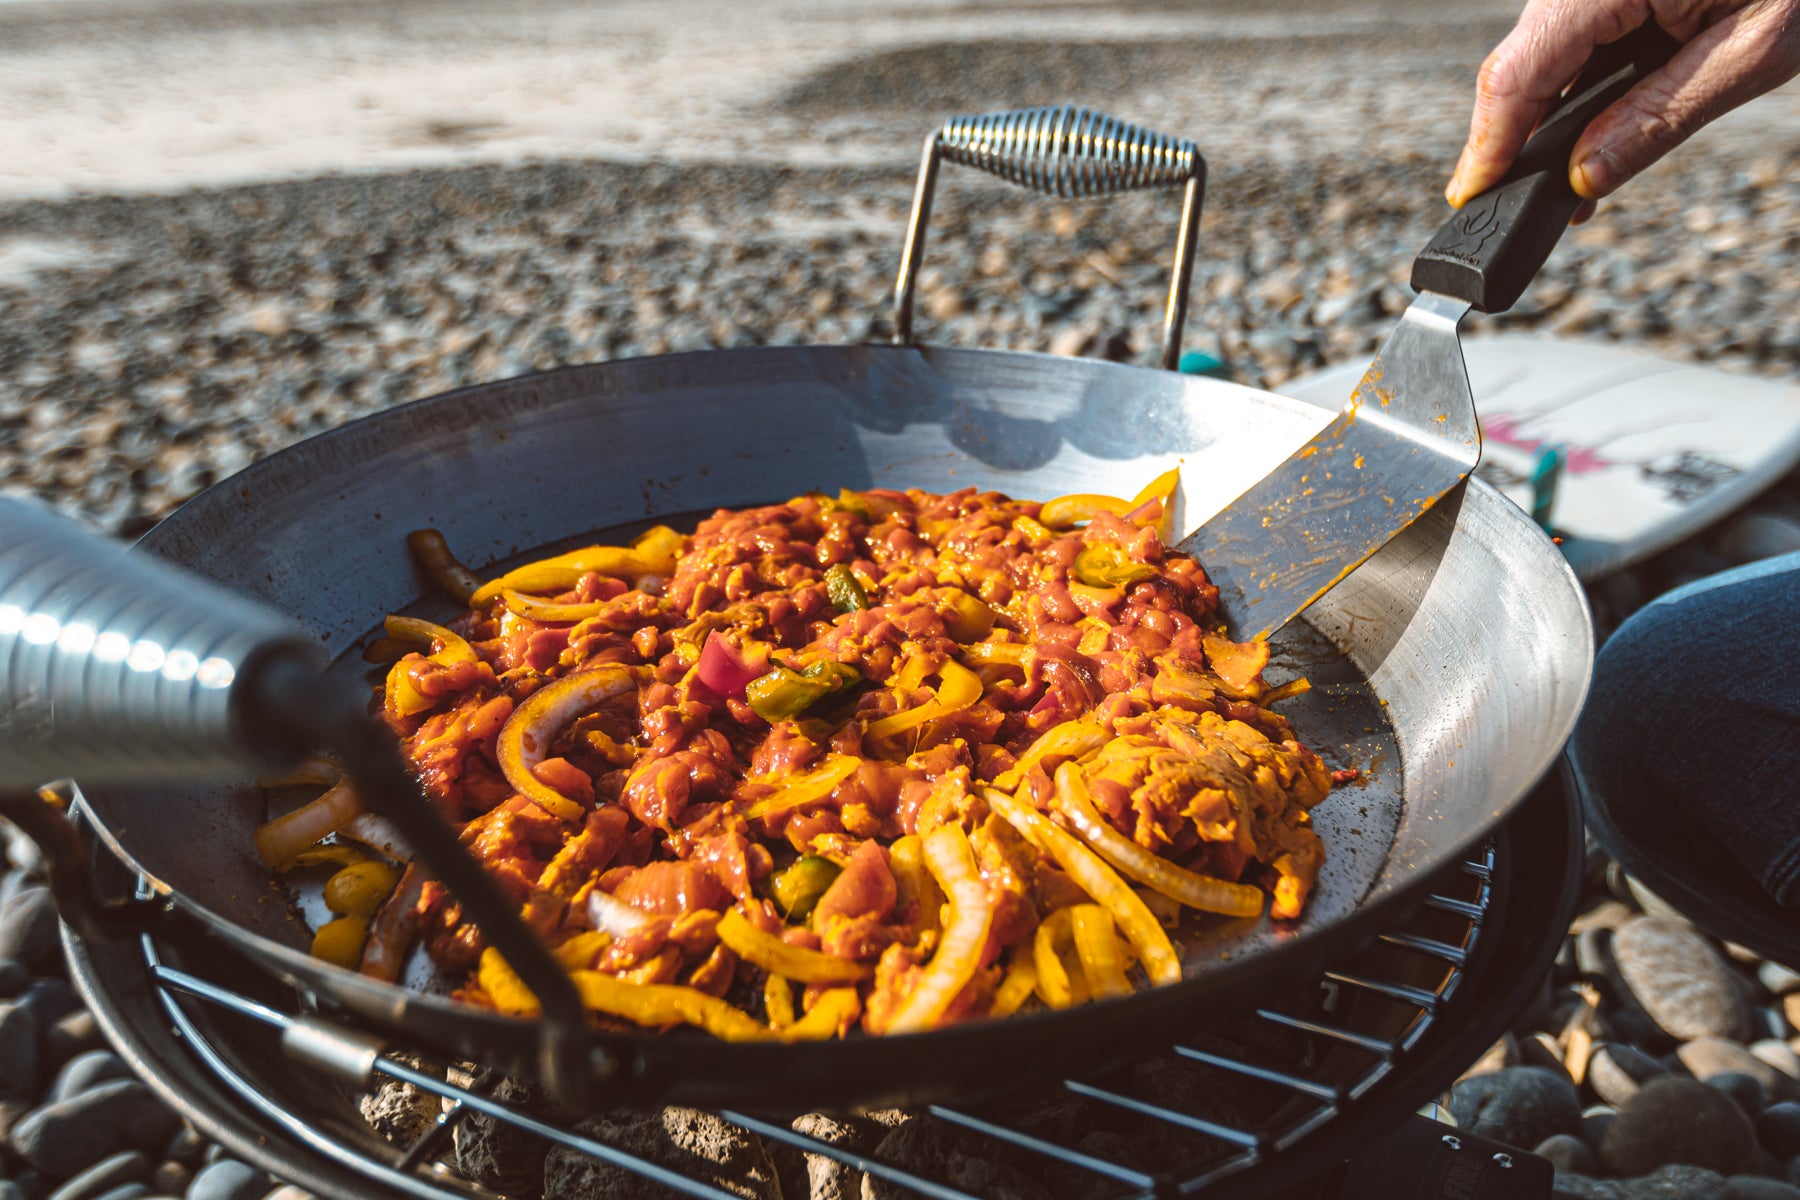 cooking a meal on the best portable grill using the wok mode